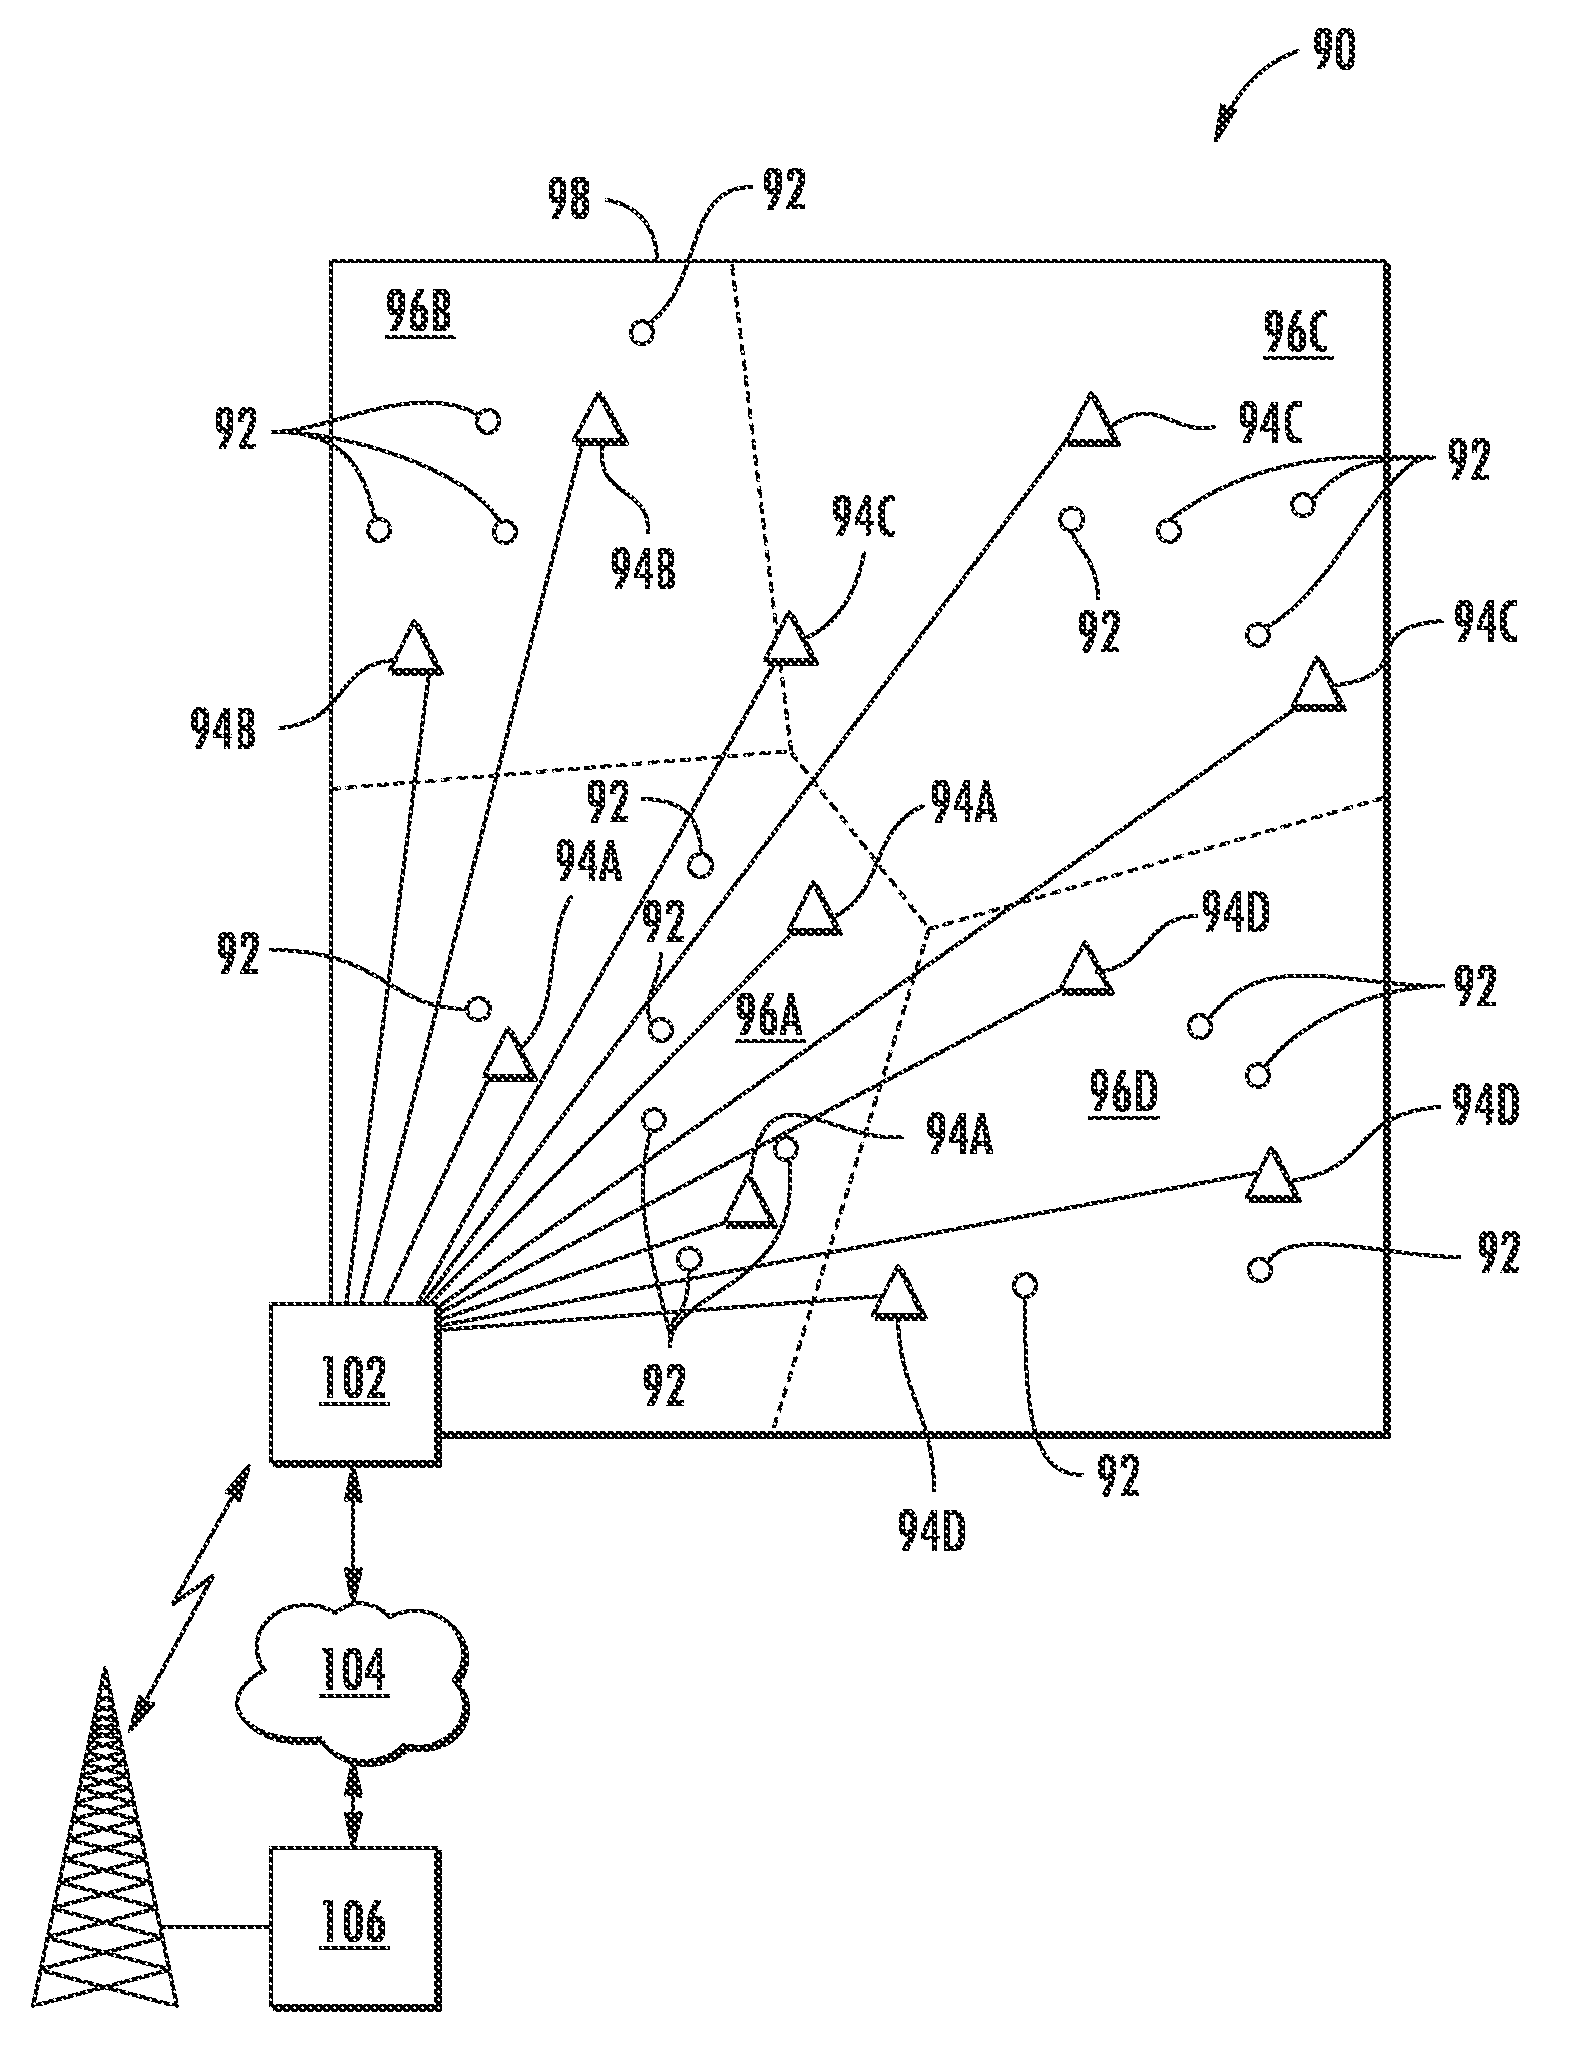 Apparatuses, systems, and methods for determining location of a mobile device(s) in a distributed antenna system(s)